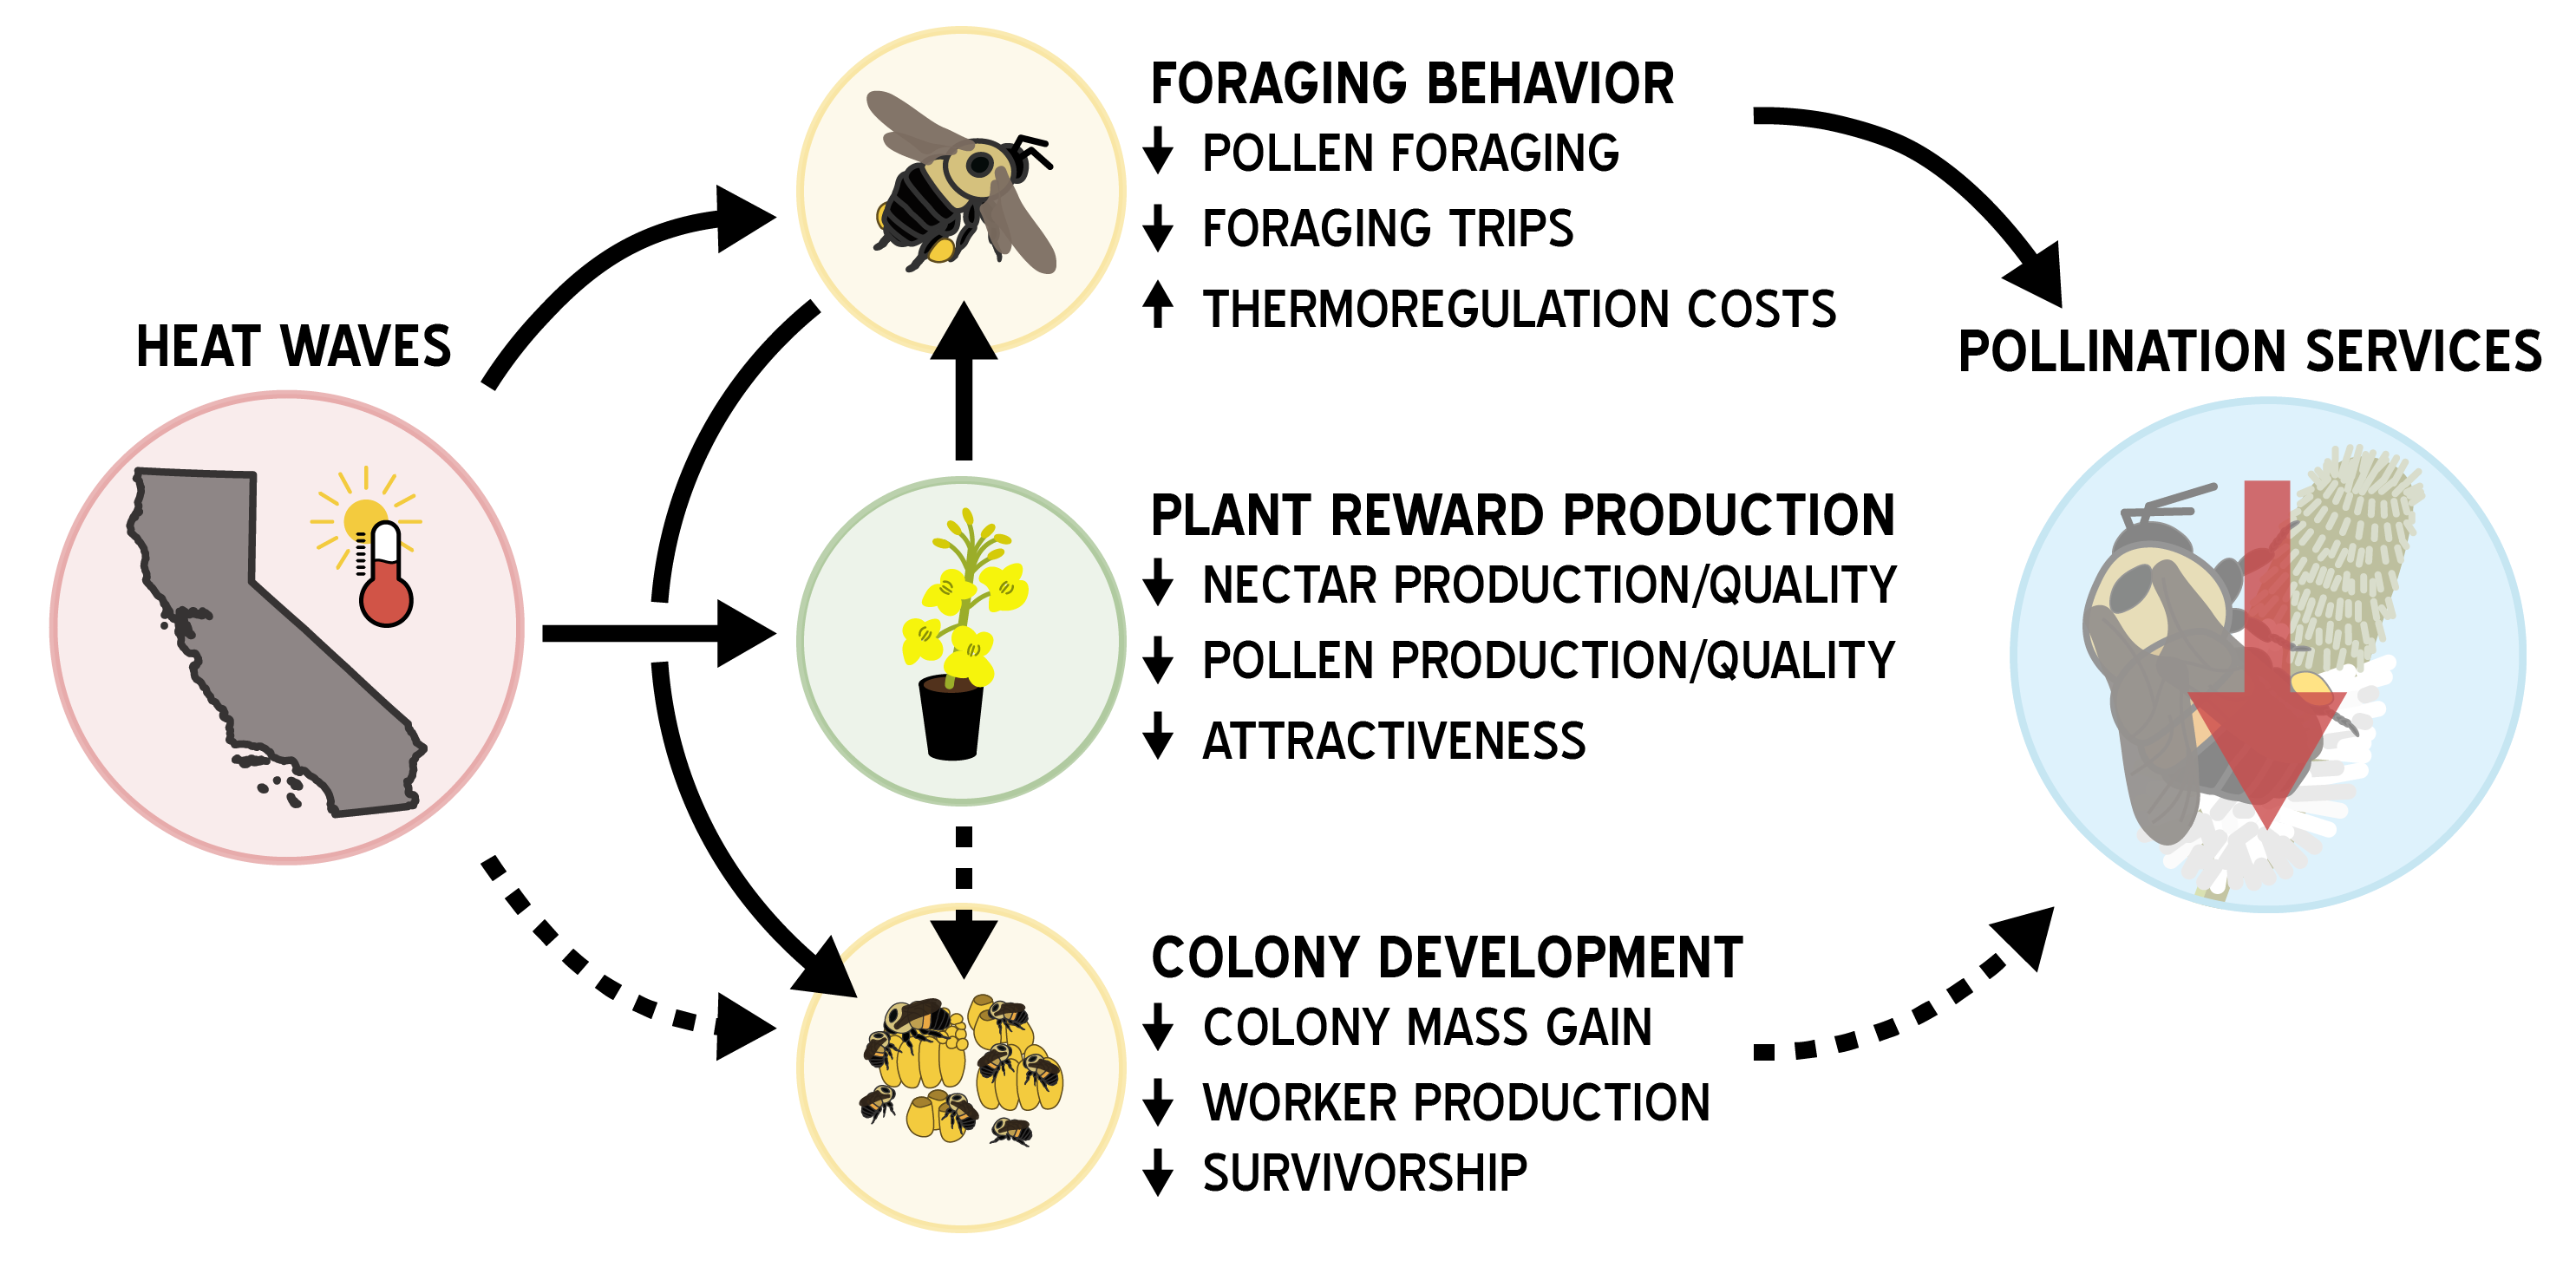 Hypothesized impact of the increasing frequency, duration, and intensity of heat waves on plant rewards and bumble bees and the ecological services they provide.